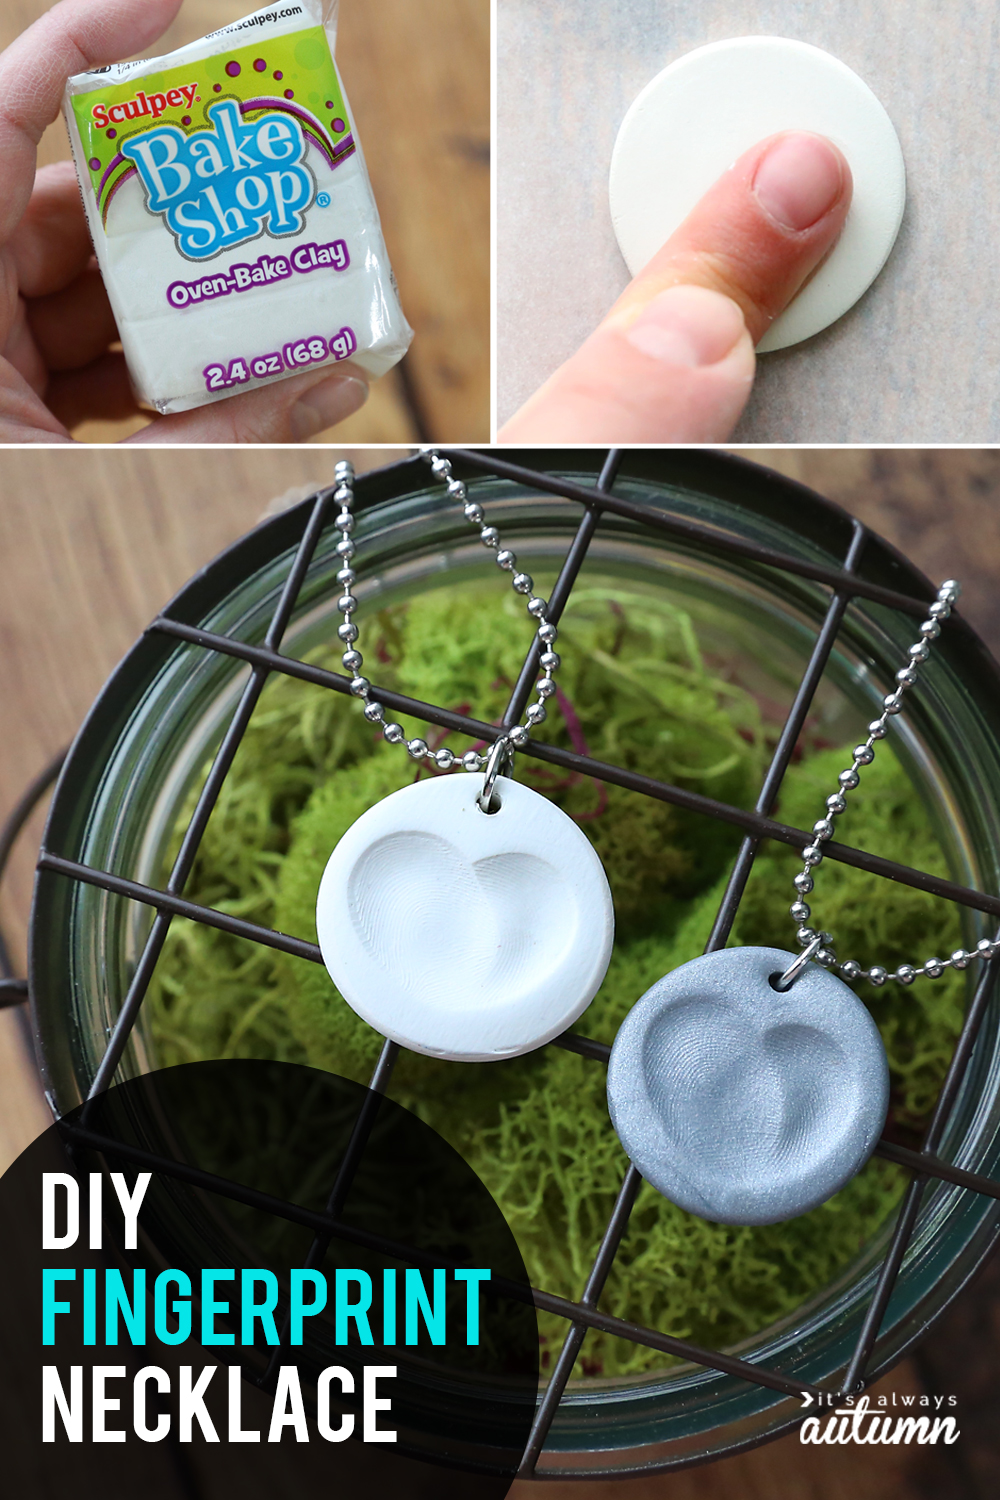 Asymmetrical Polymer Clay Necklaces by Bellou / The Beading Gem